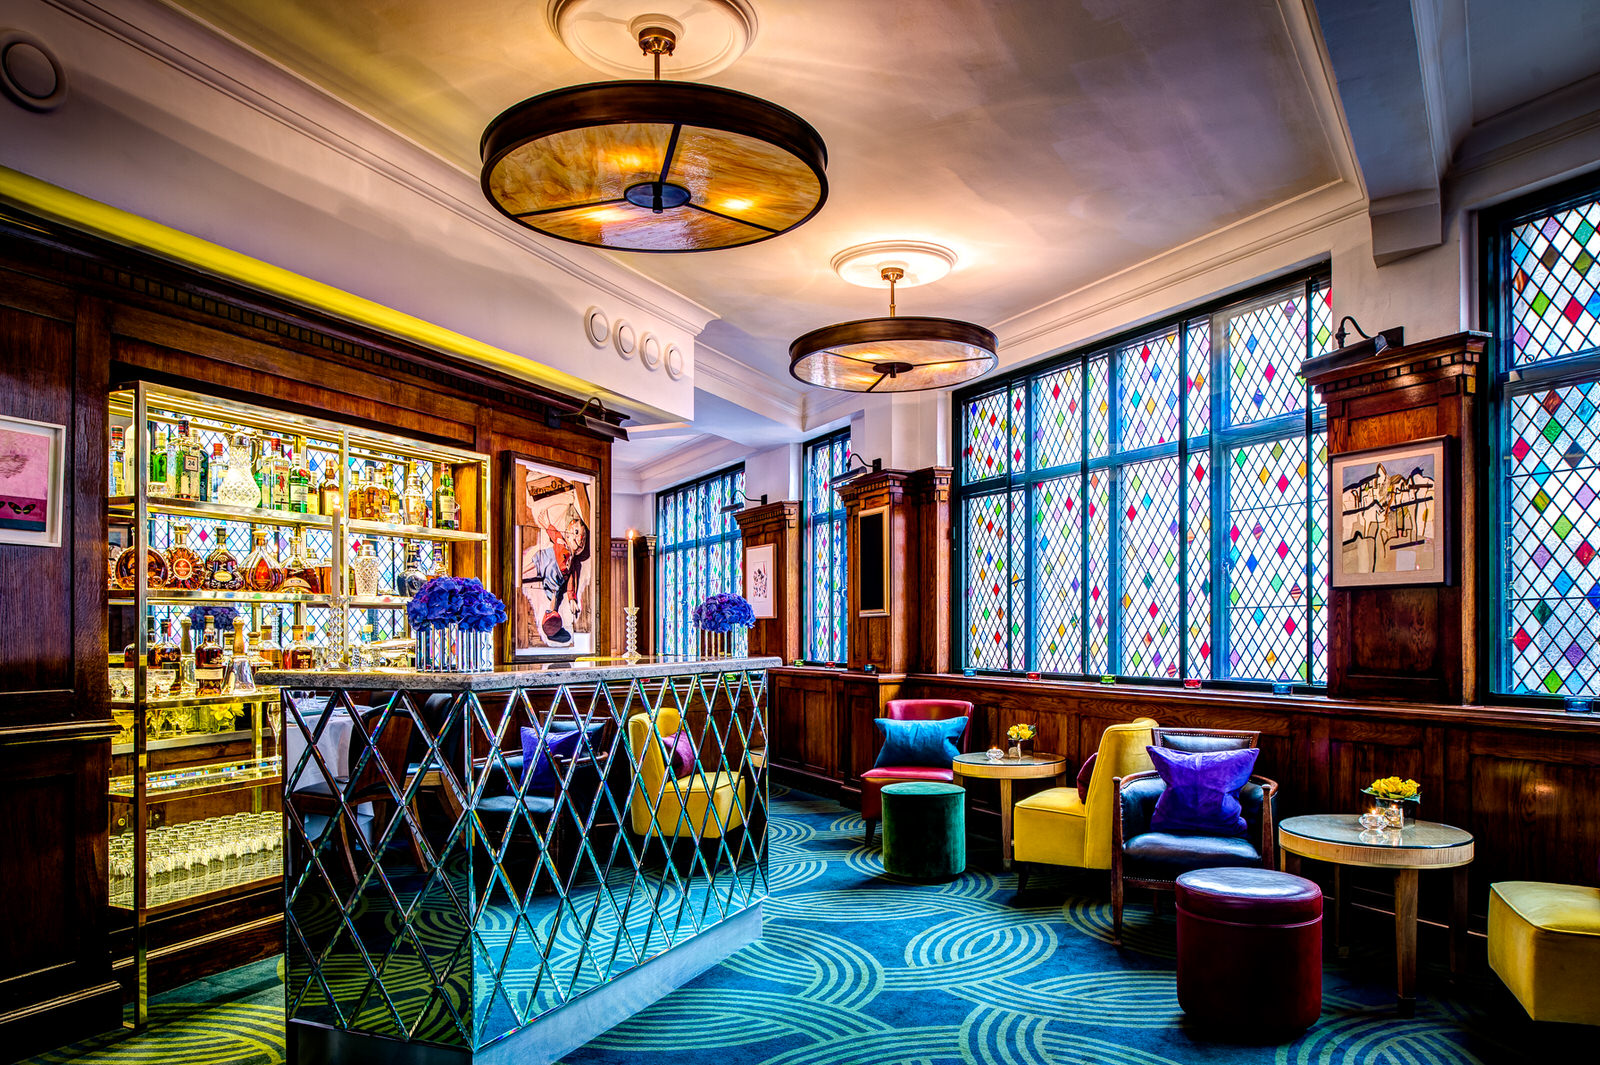 The Ivy - Interiors | Published Work photographer pwf